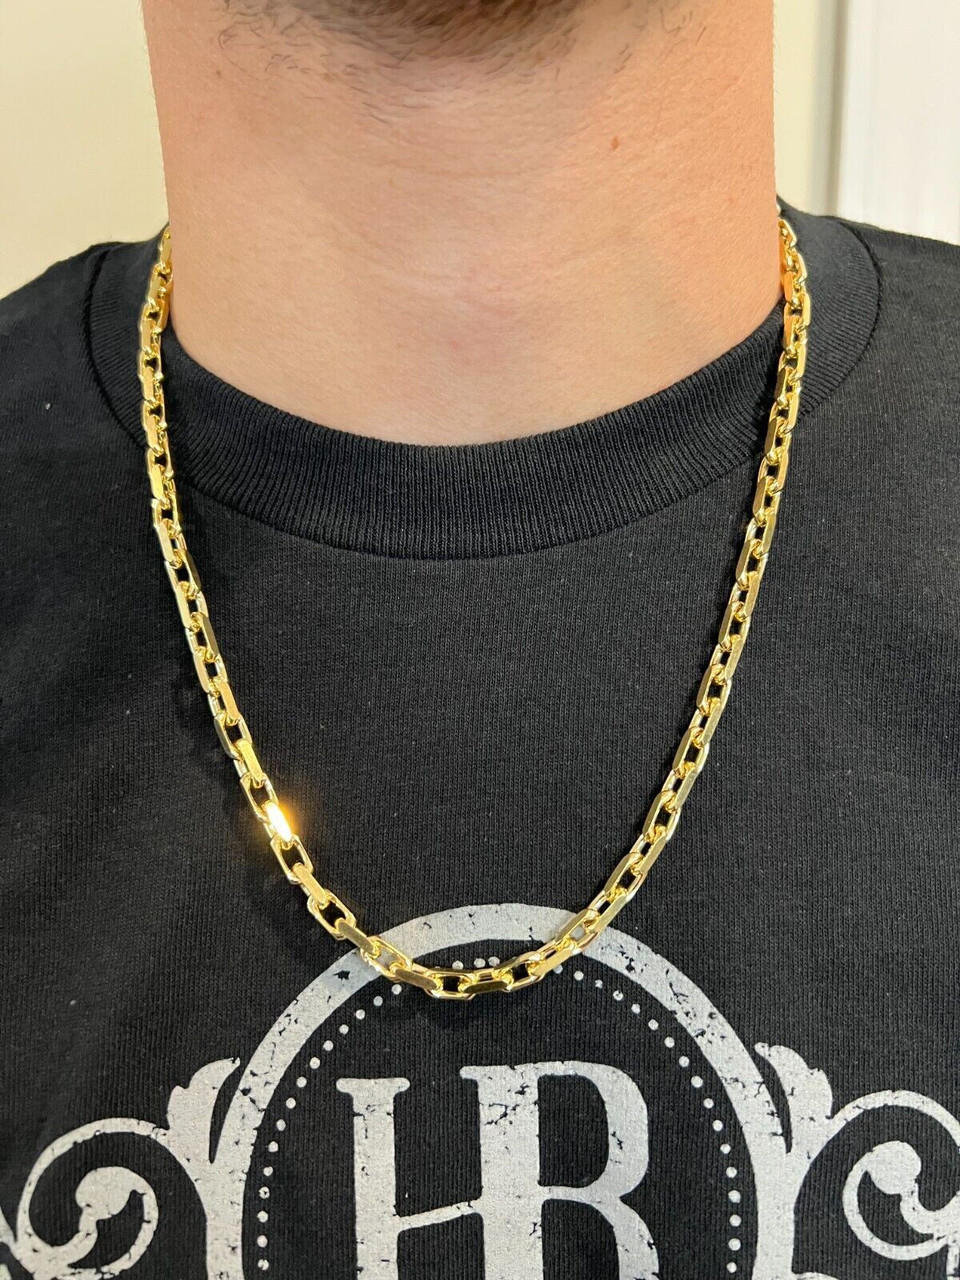 10k Yellow Gold Hermes Link Chain 2 mm